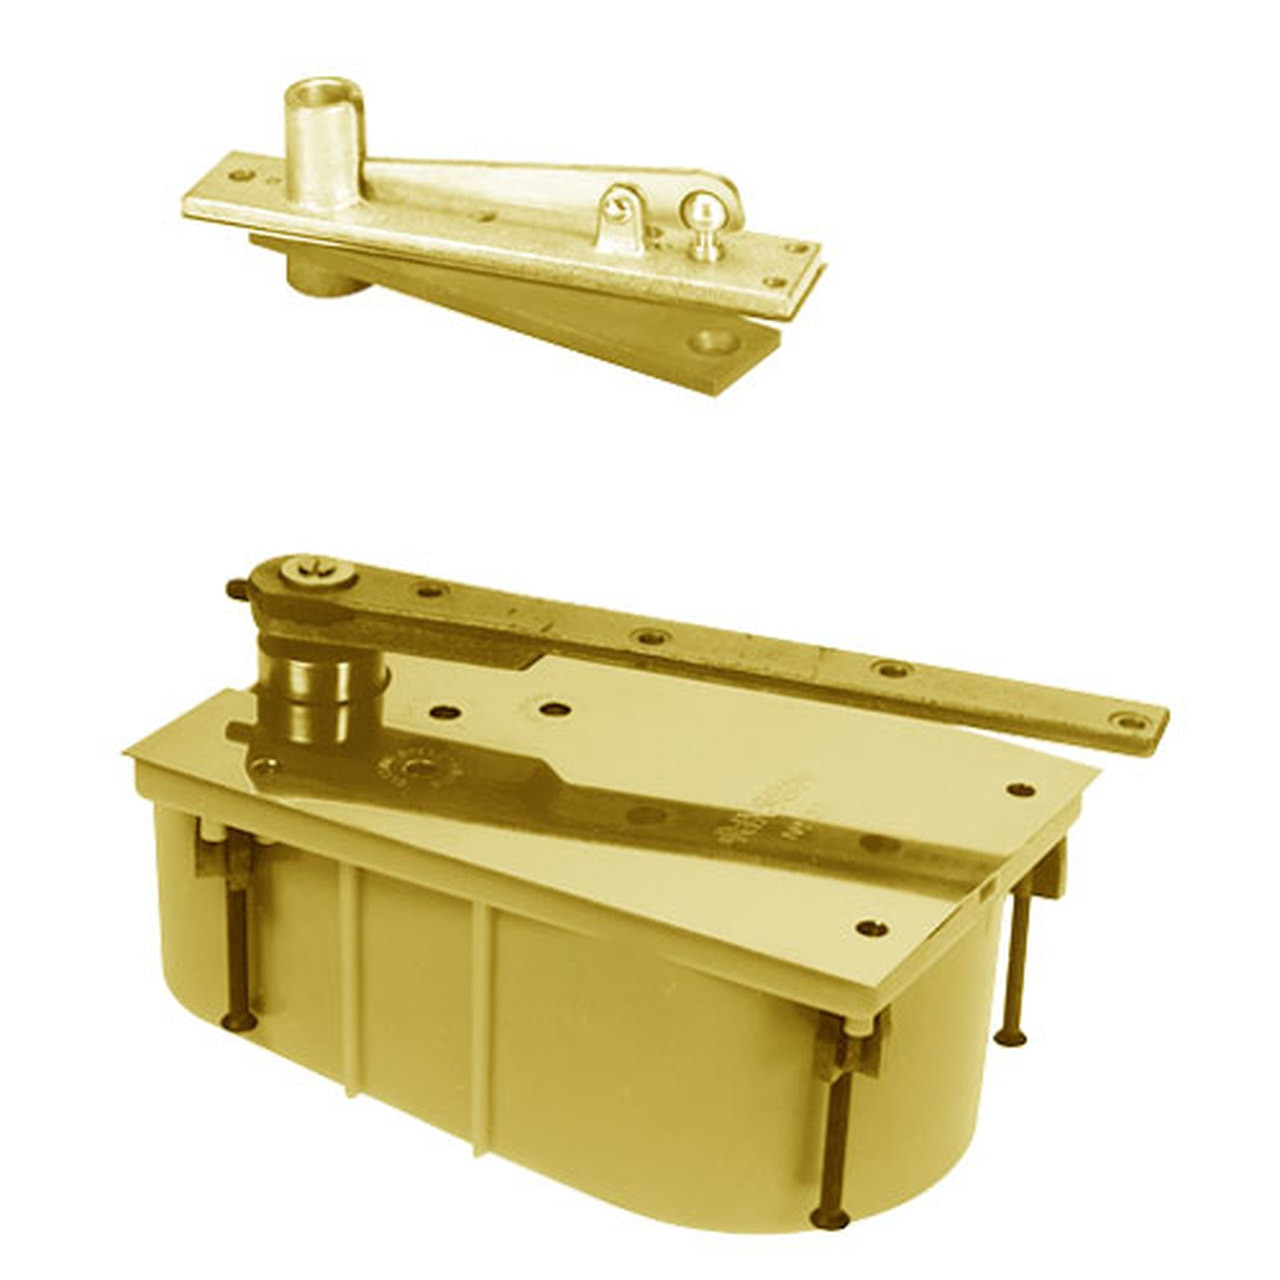 28-105S-554-LFP-LCC-LH-605 Rixson 28 Series Heavy Duty Single Acting Center Hung Floor Closer with Concealed Arm in Bright Brass Finish